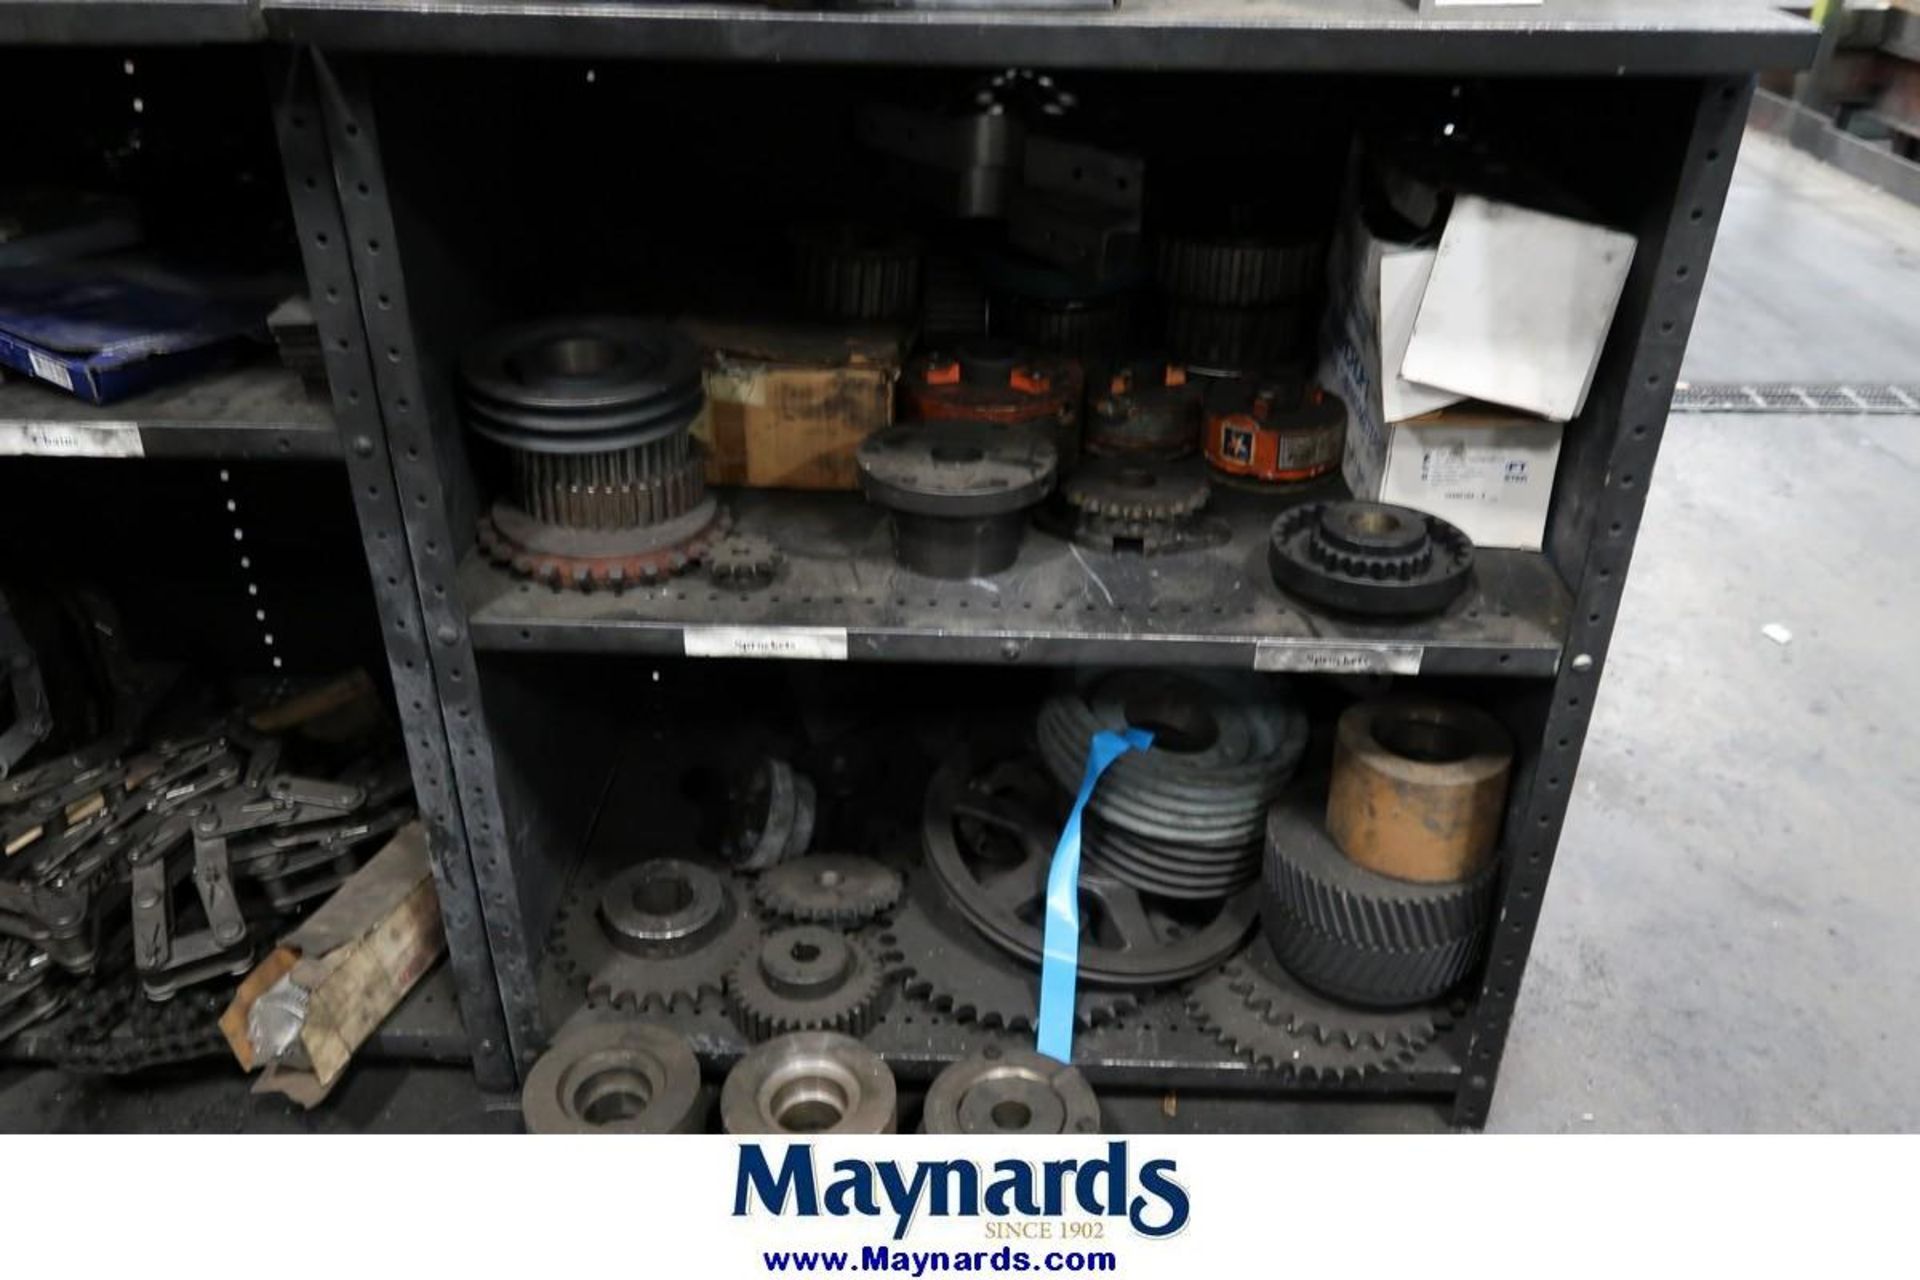 Adjustable Steel Shelving Units with Contents of Heat Treat Spare Parts - Image 16 of 16